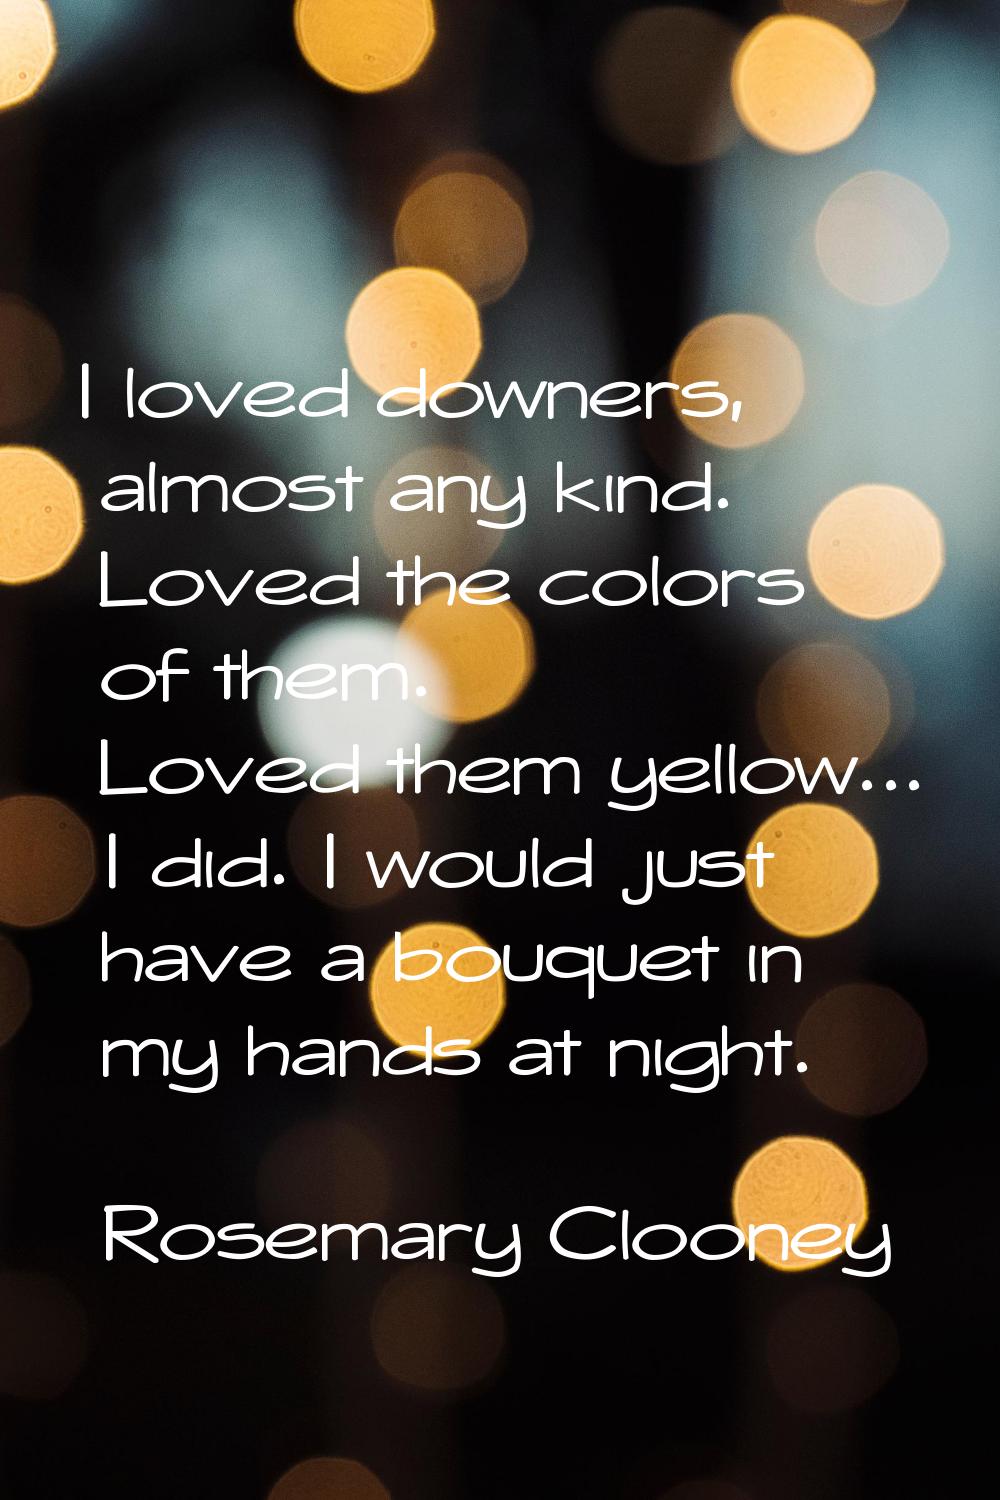 I loved downers, almost any kind. Loved the colors of them. Loved them yellow... I did. I would jus